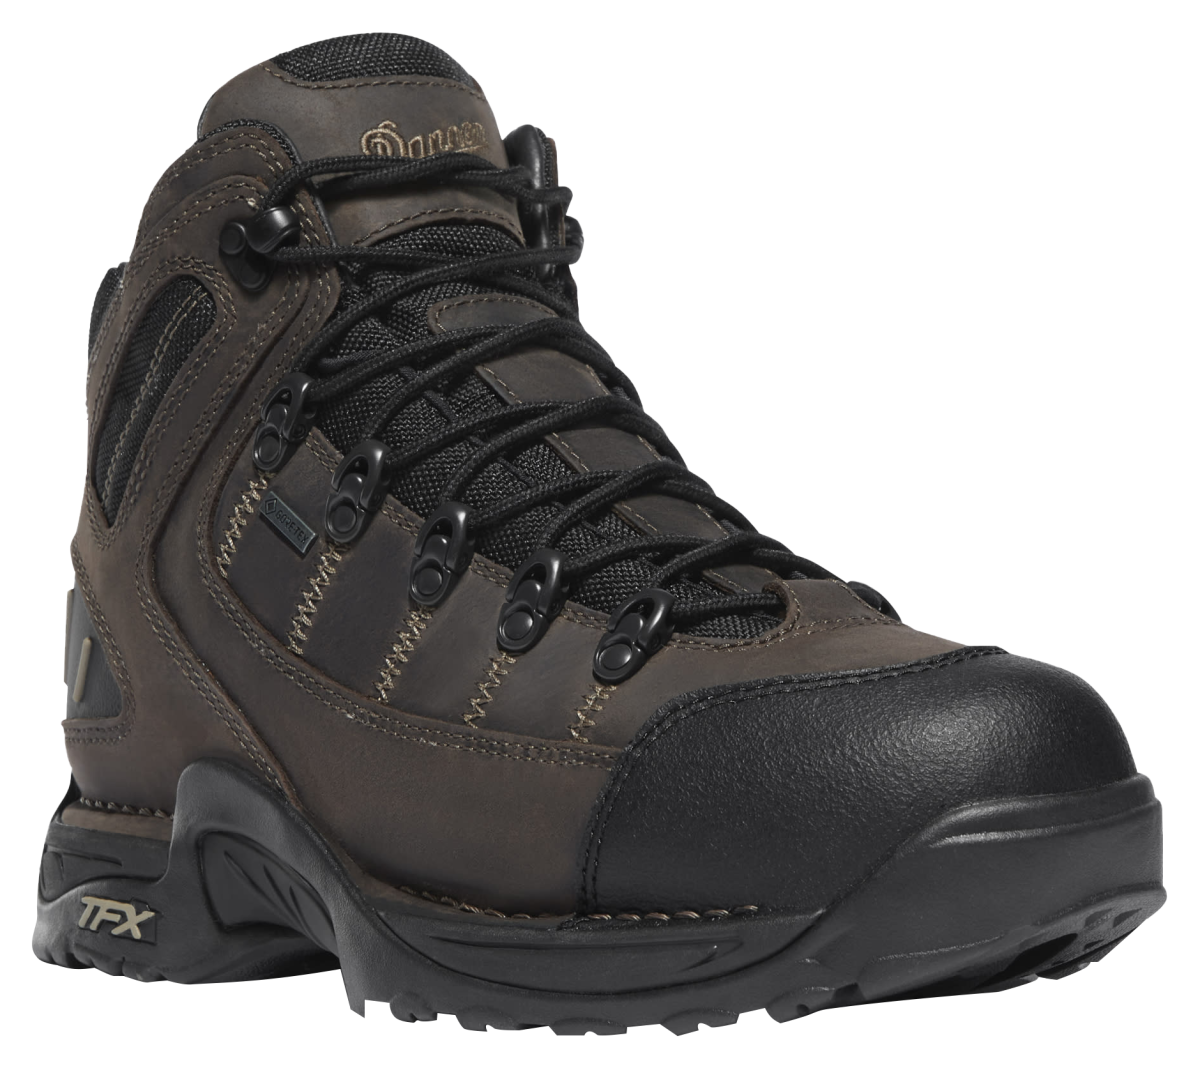 Danner 453 GORE-TEX Waterproof Hiking Boots for Men - Loam Brown/Chocolate Chip - 9W